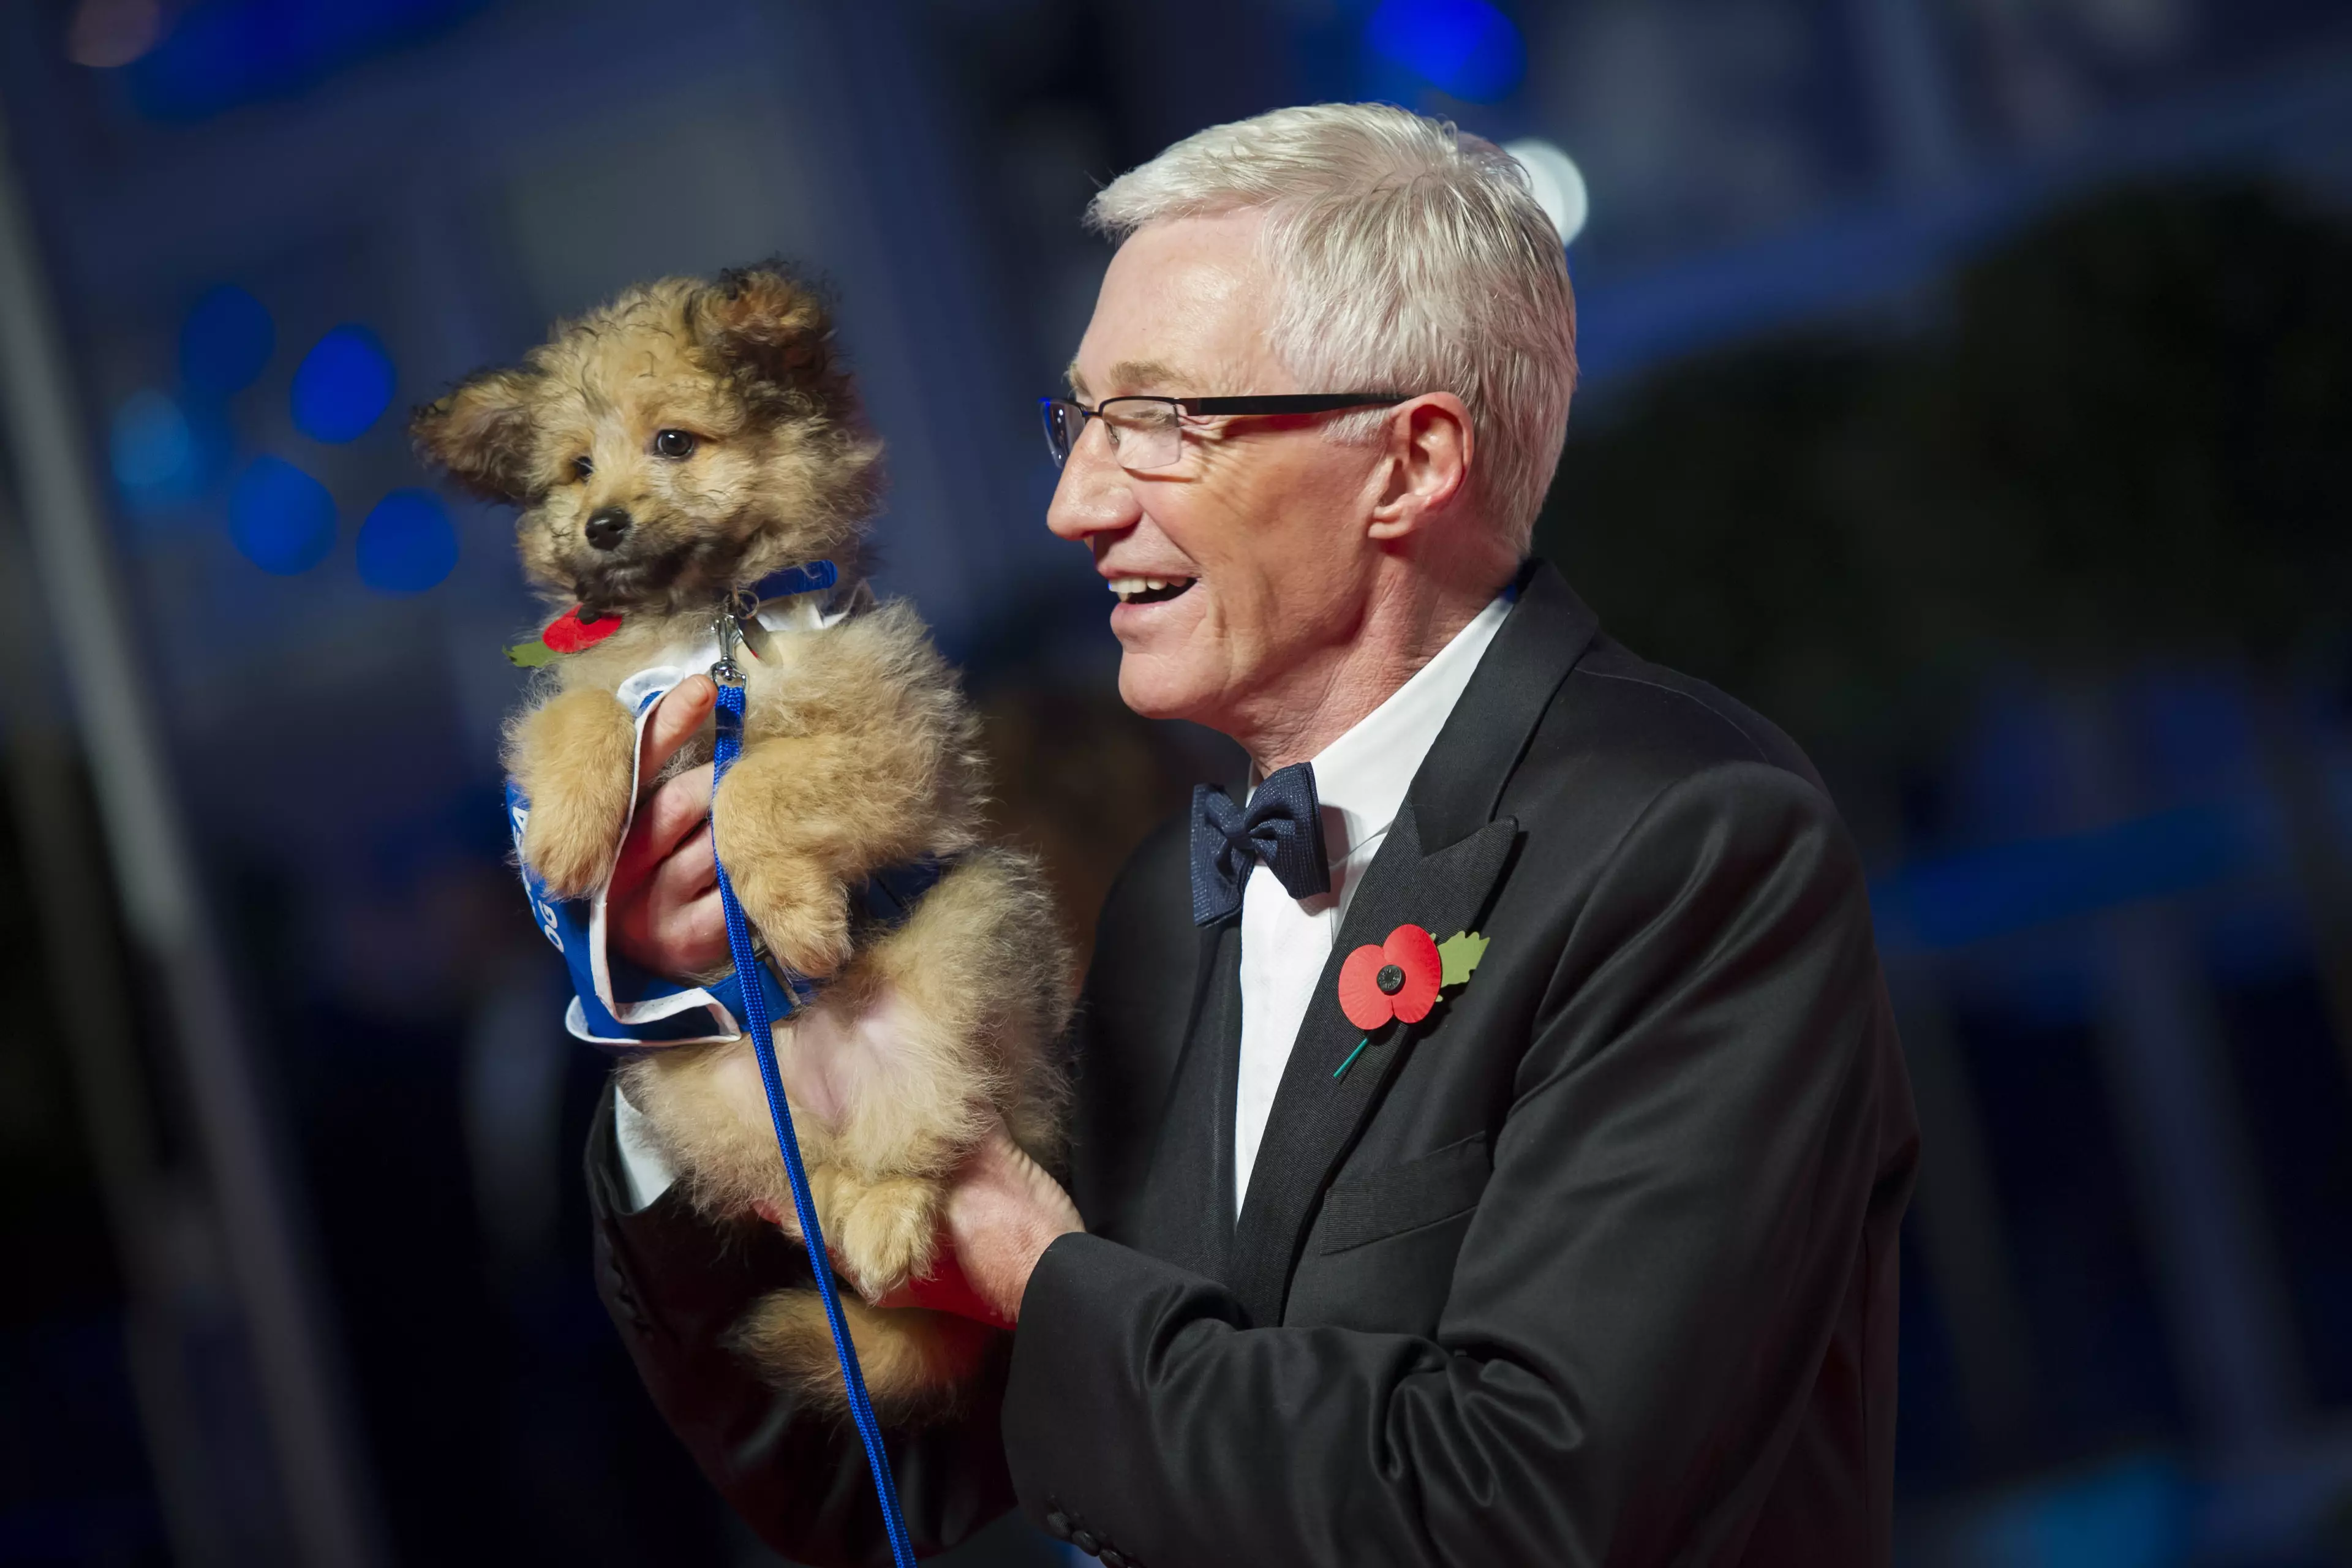 O'Grady is an ambassador for Battersea Dogs & Cats Home.